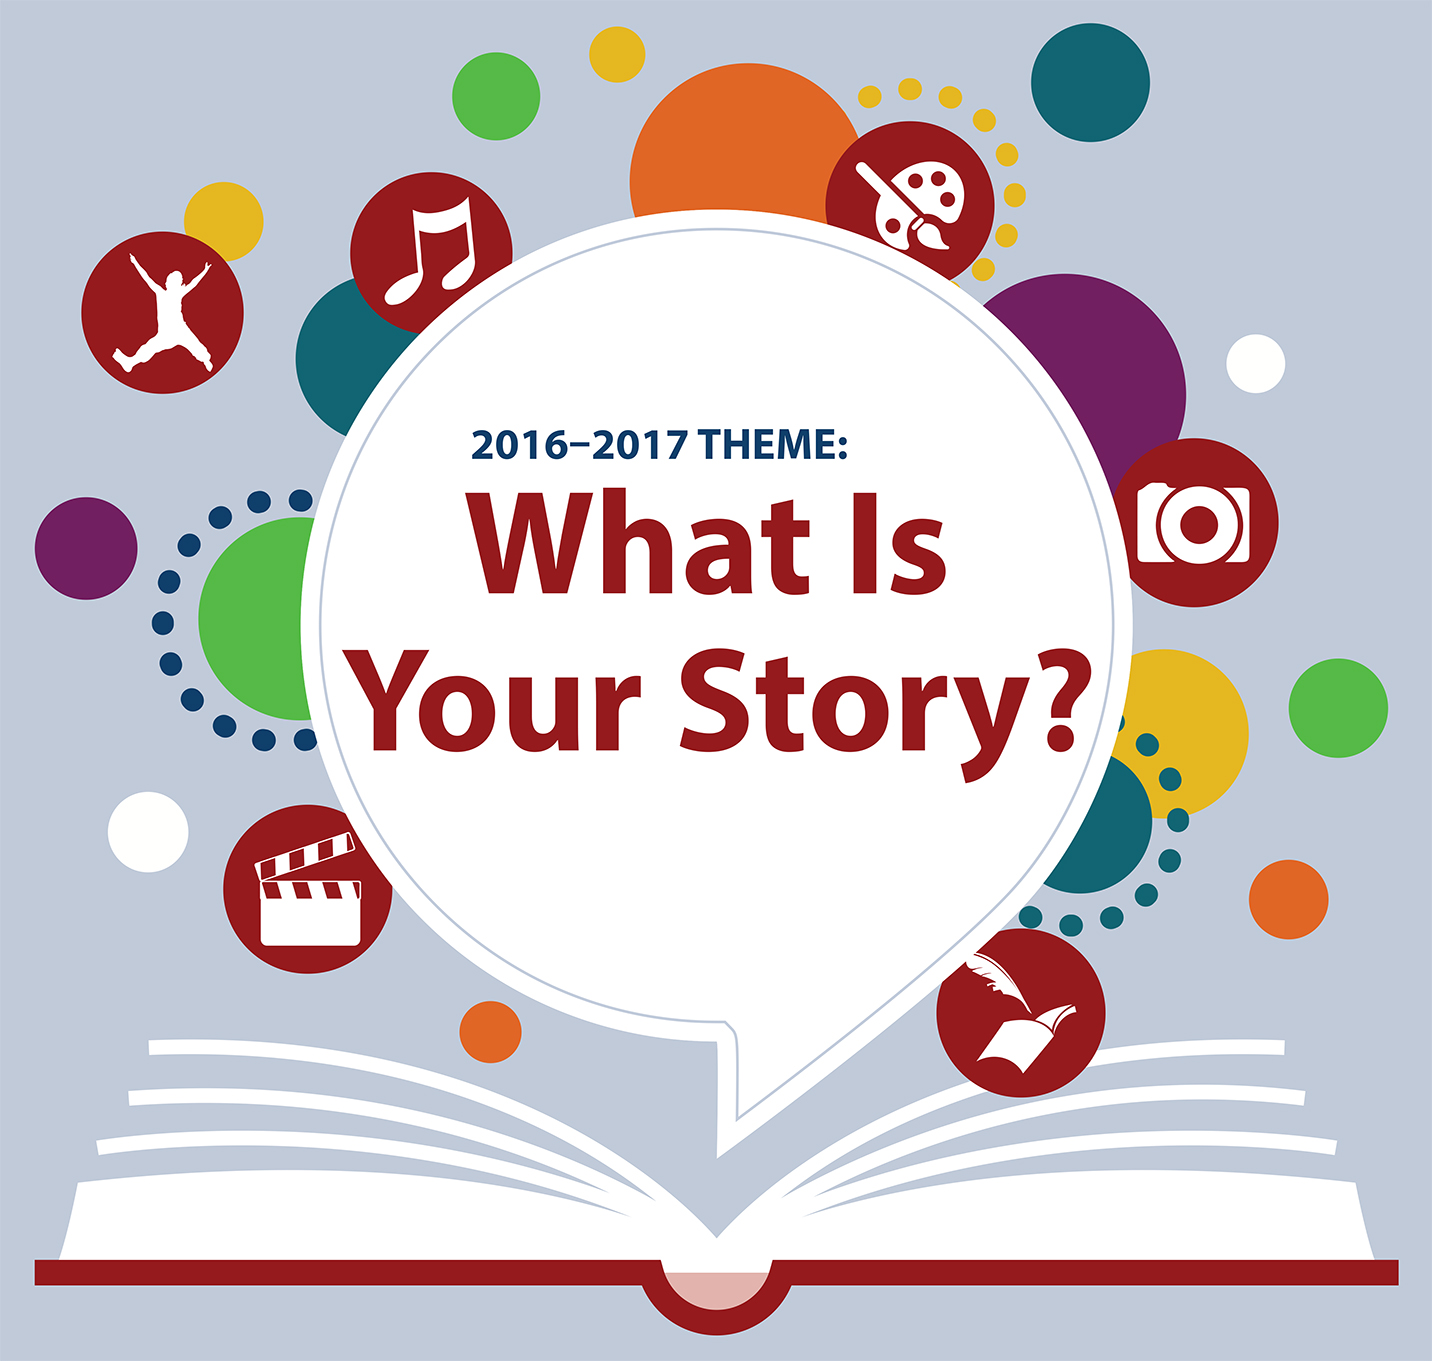 Theme: What is your story?